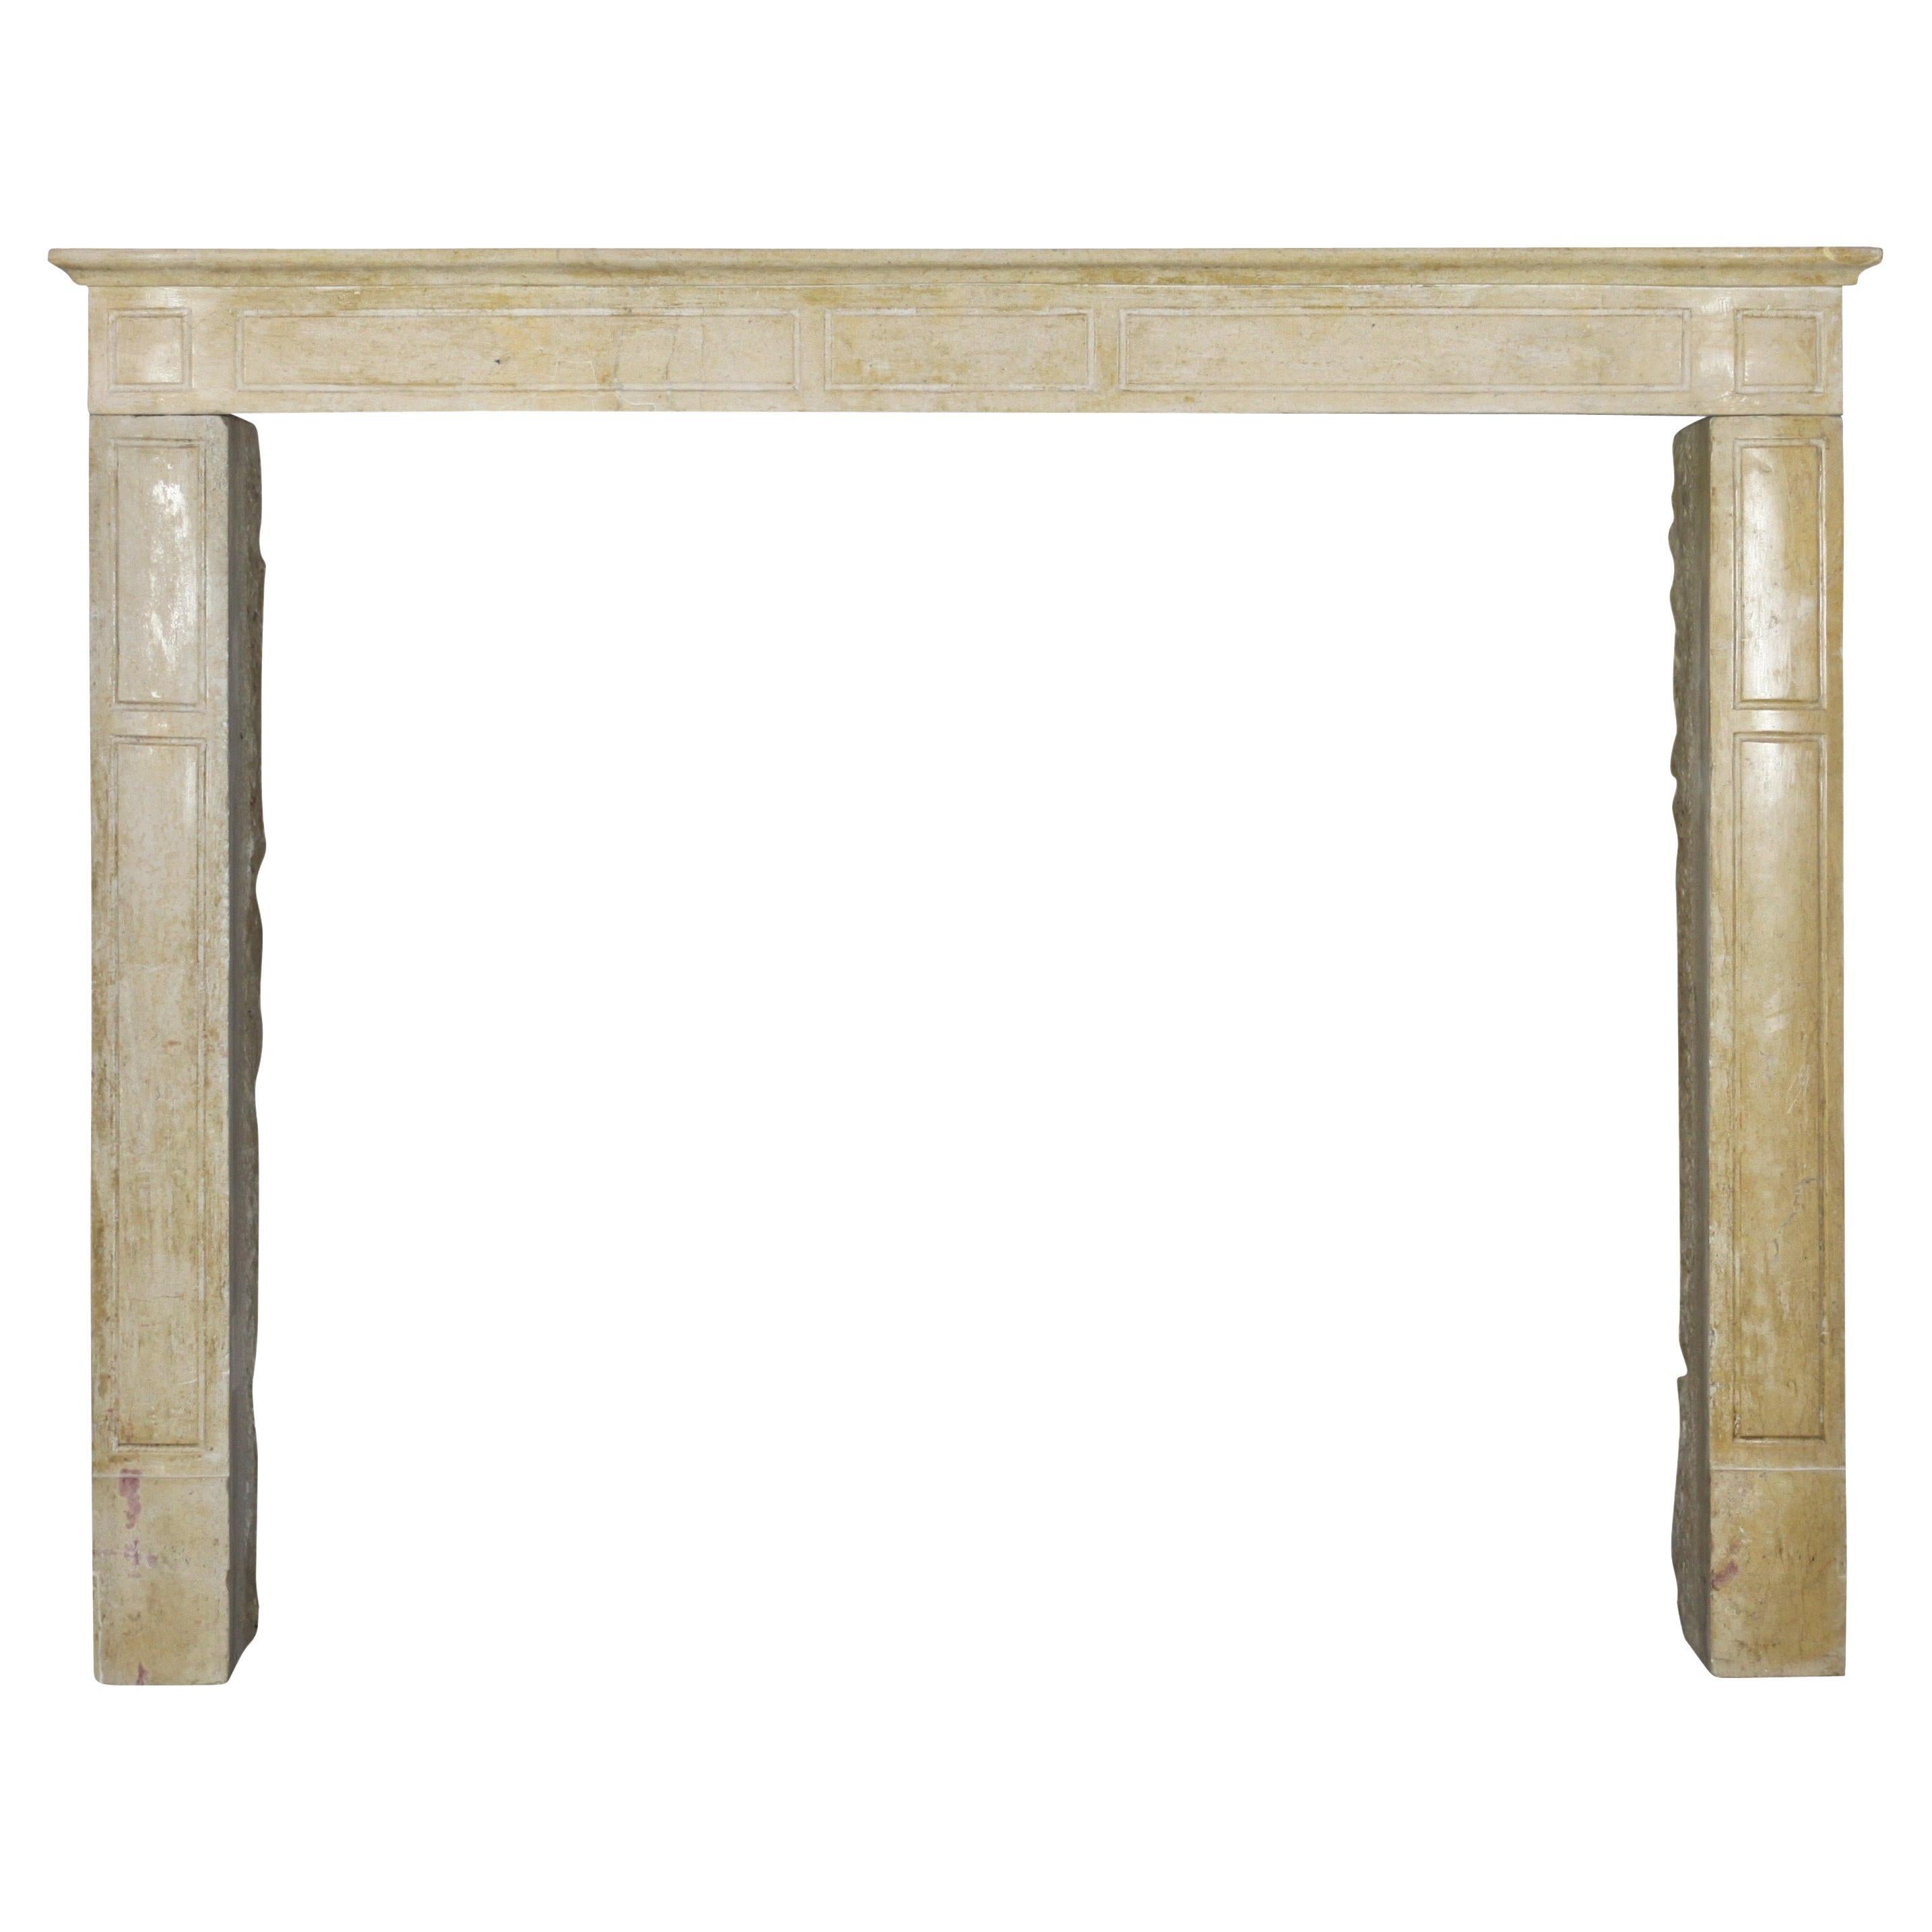 French Timeless Burgundy Region Fireplace Surround In Limestone For Sale